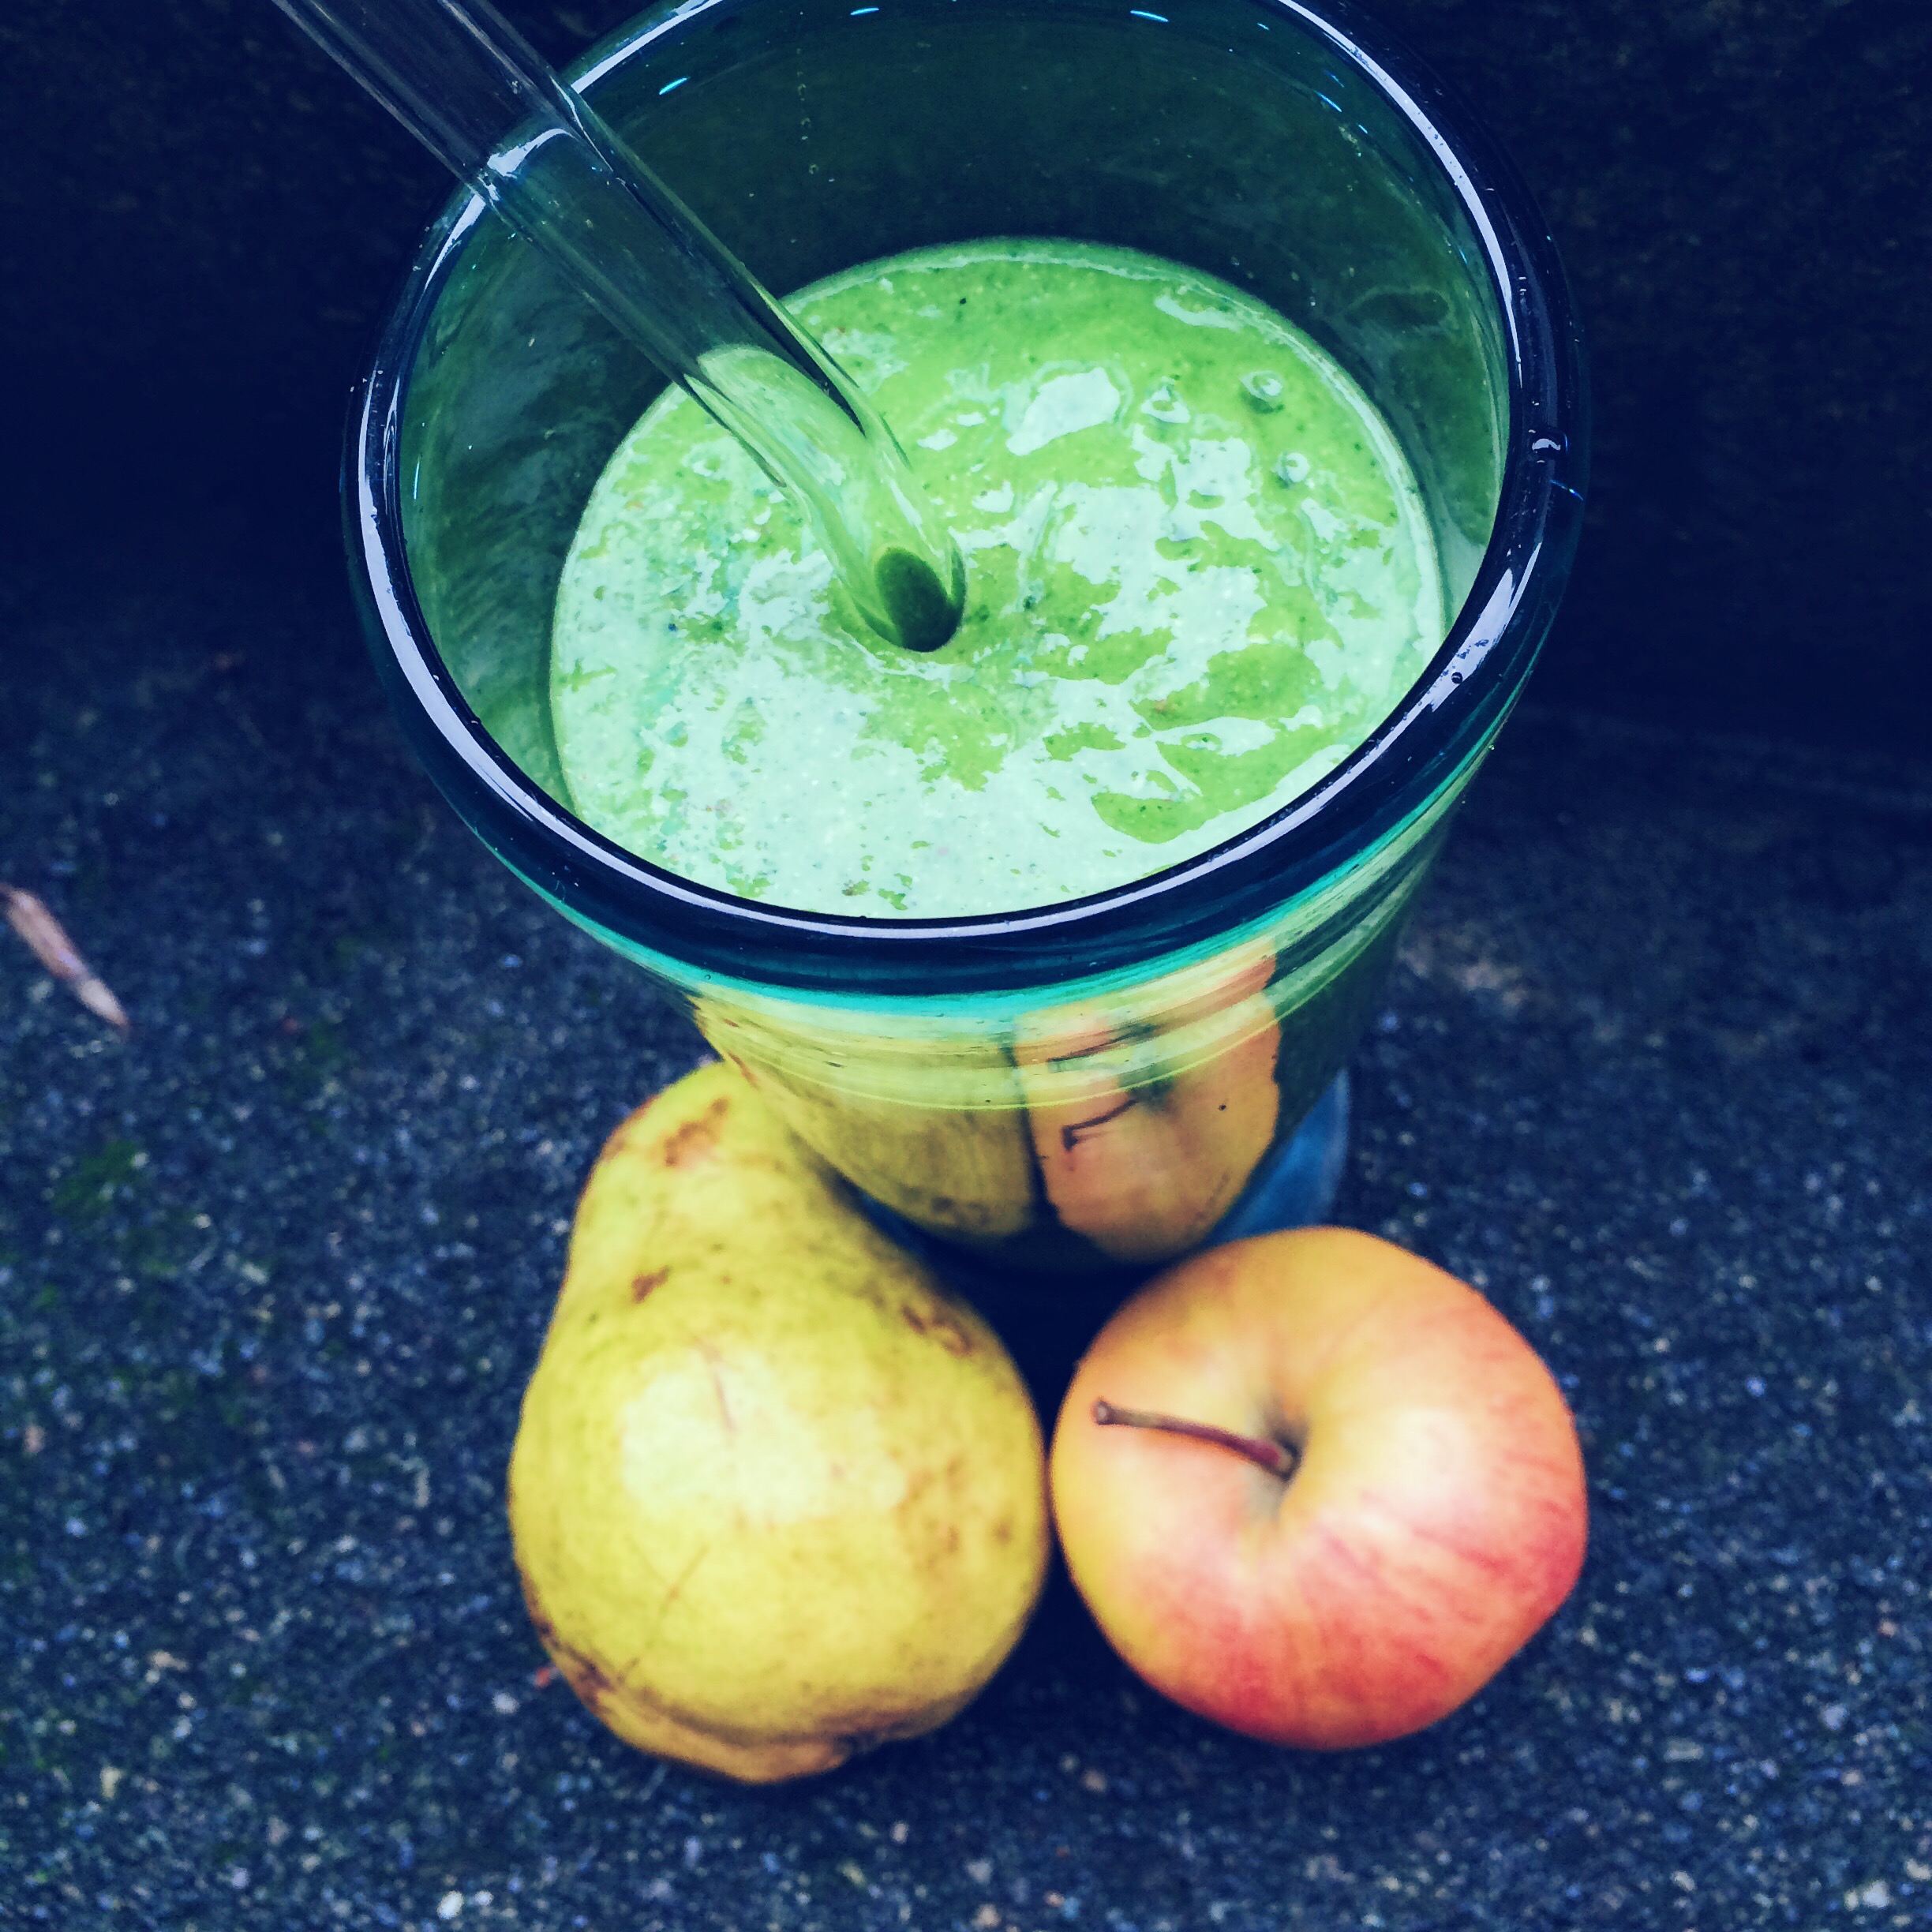 Review of the Deliciously Ella Apple Pear Spinach Detox Smoothie